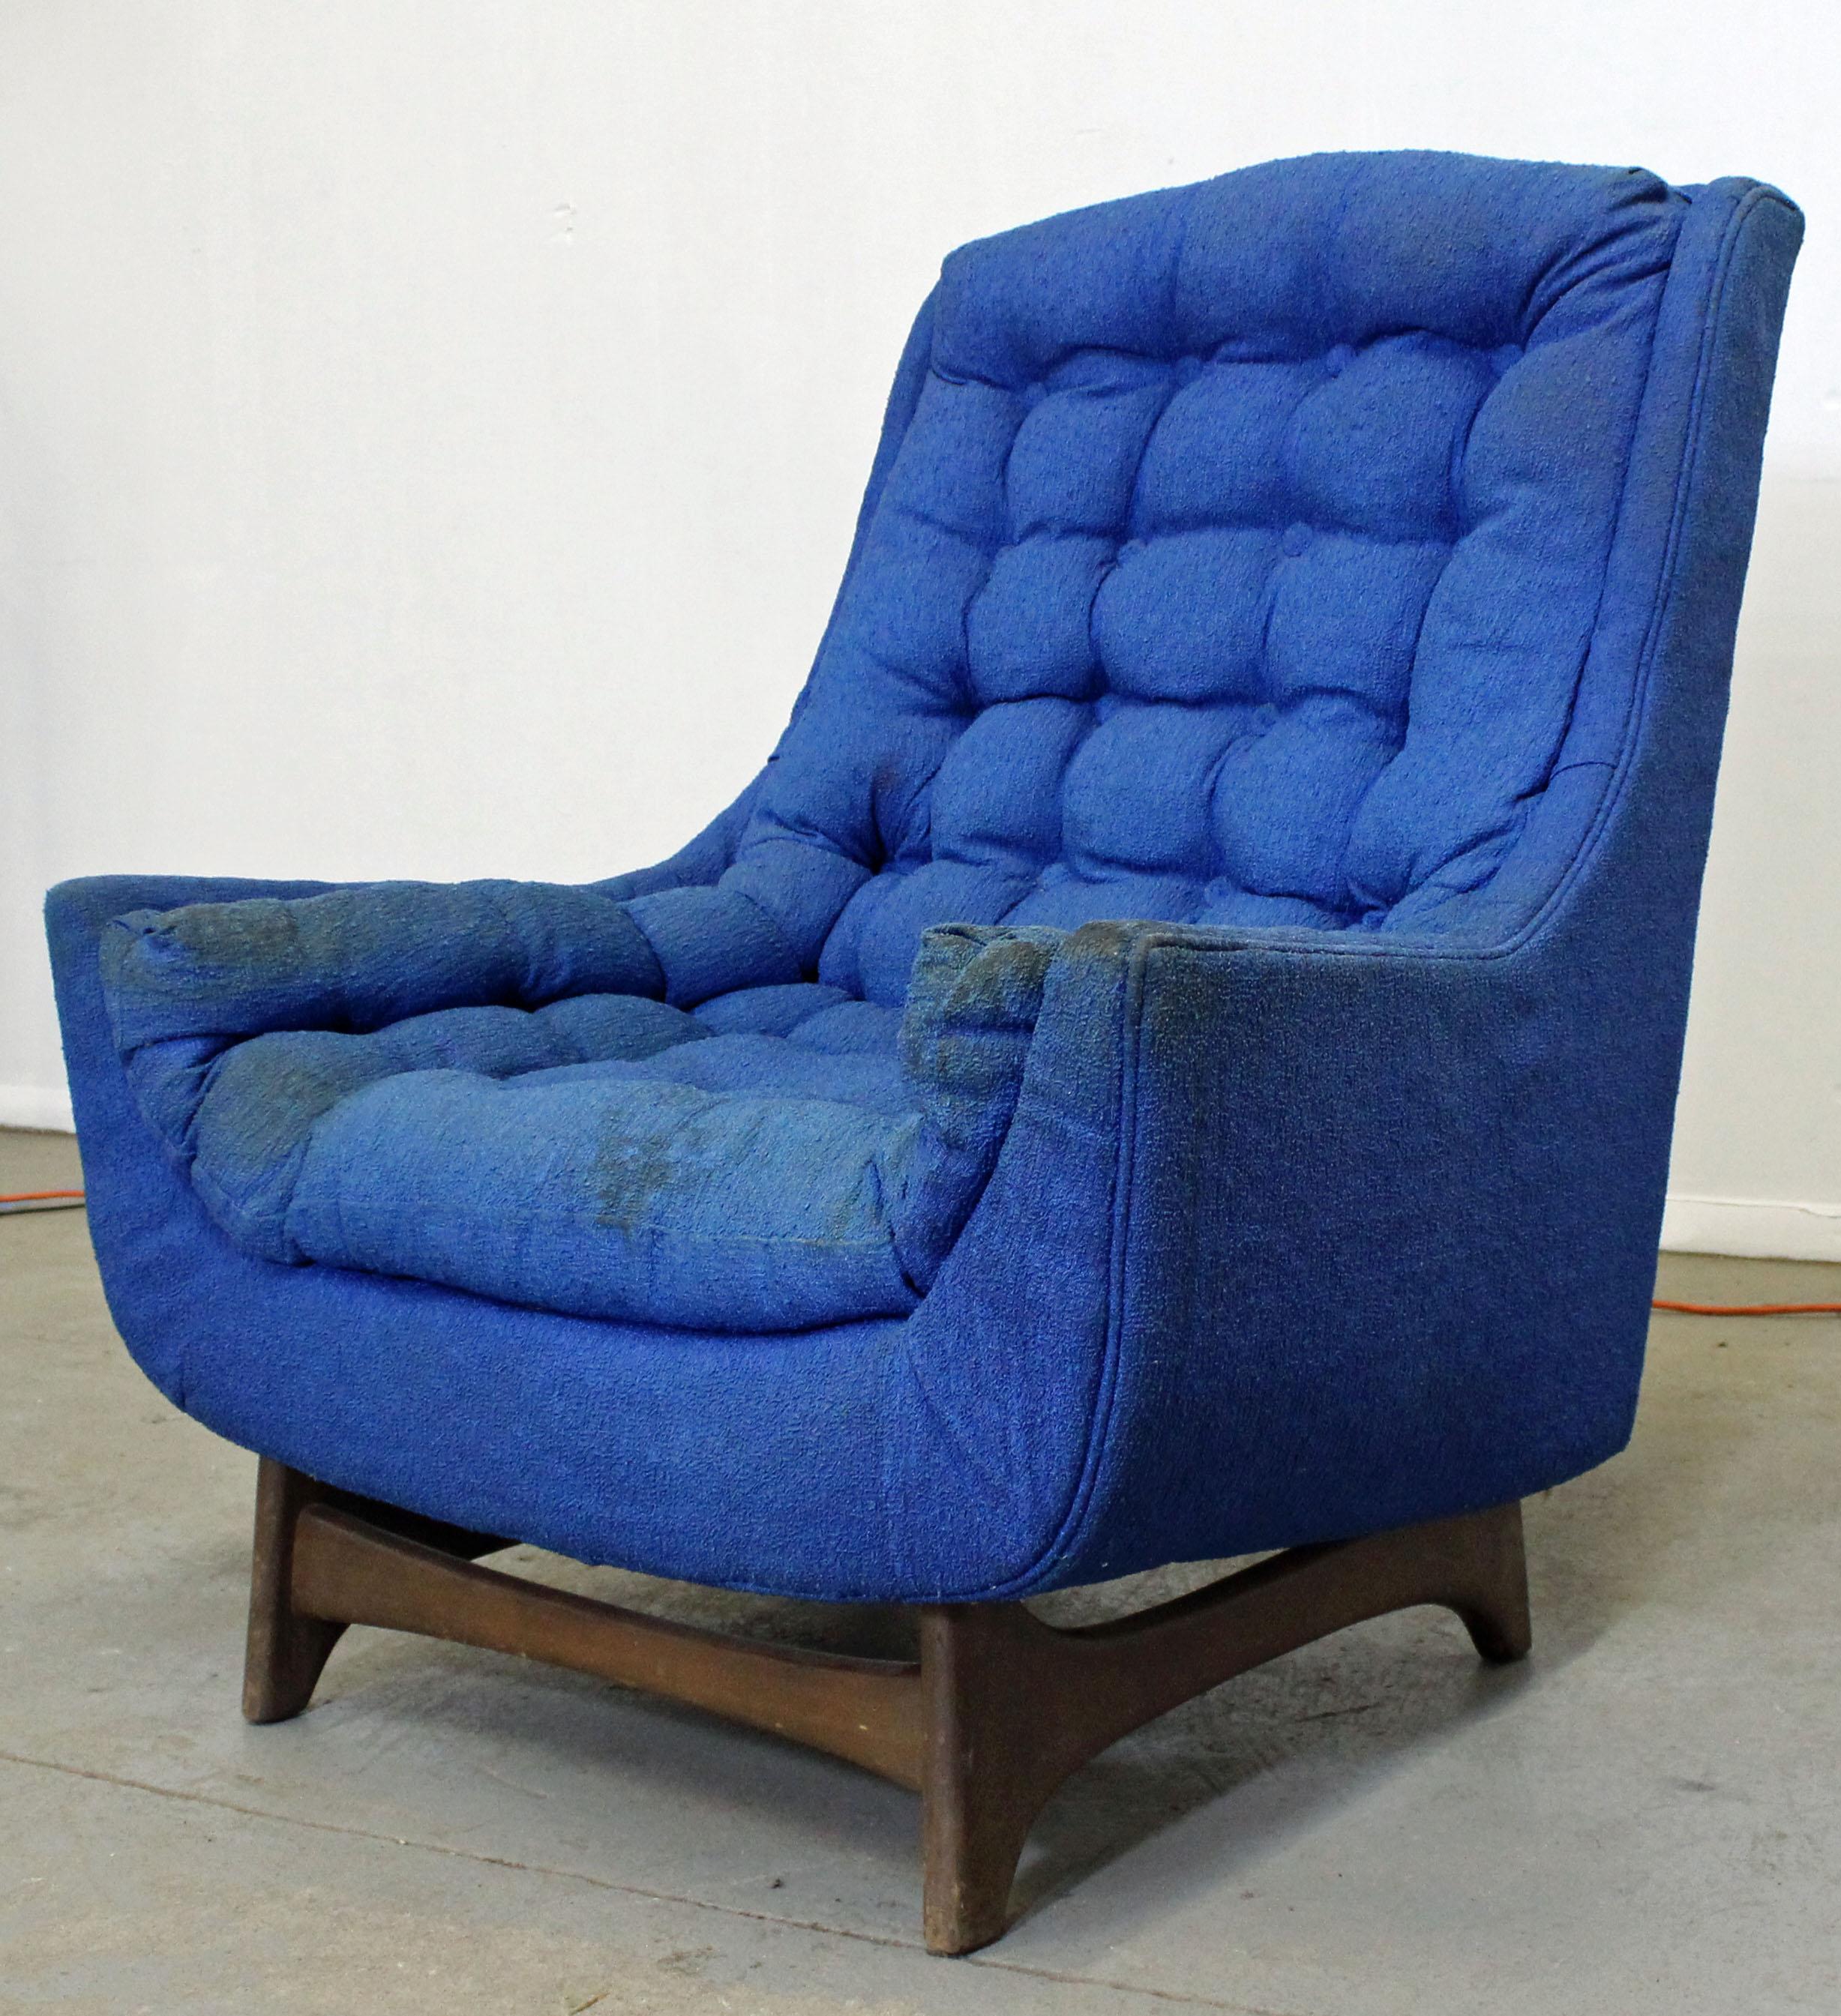 What a find. Offered is a Mid-Century Modern lounge chair with blue upholstery and a walnut base. It is structurally sound, but needs to be reupholstered). It is not signed. See our other listings for more midcentury and Danish modern